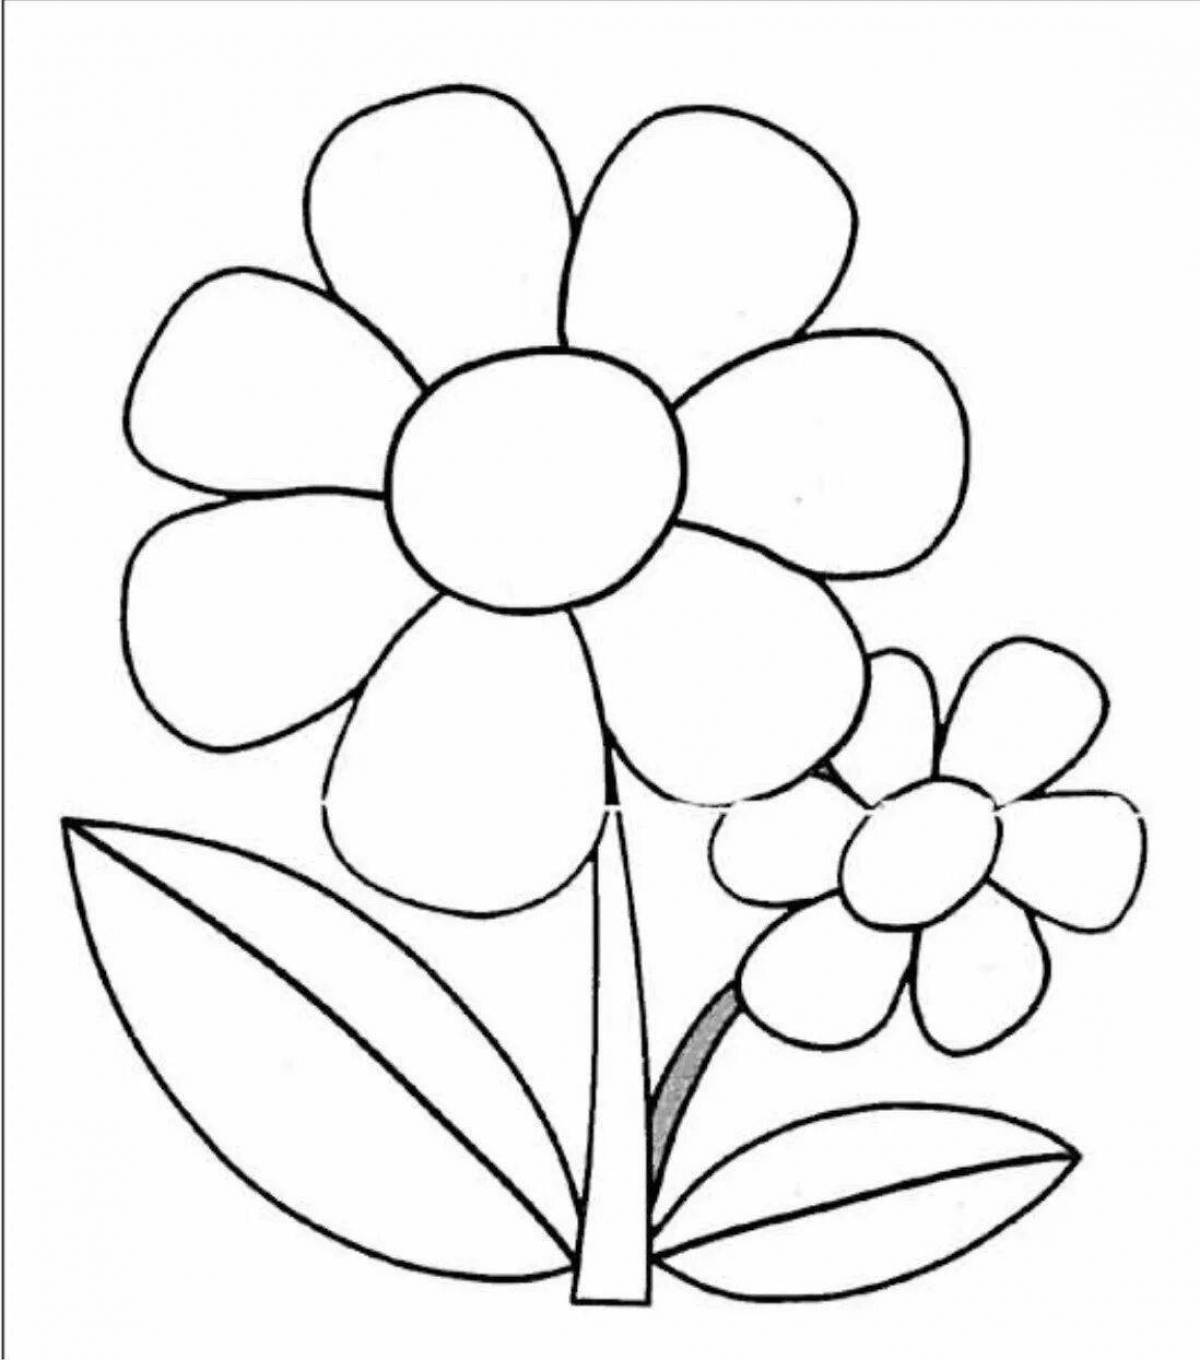 Blooming coloring page with seven colors for toddlers